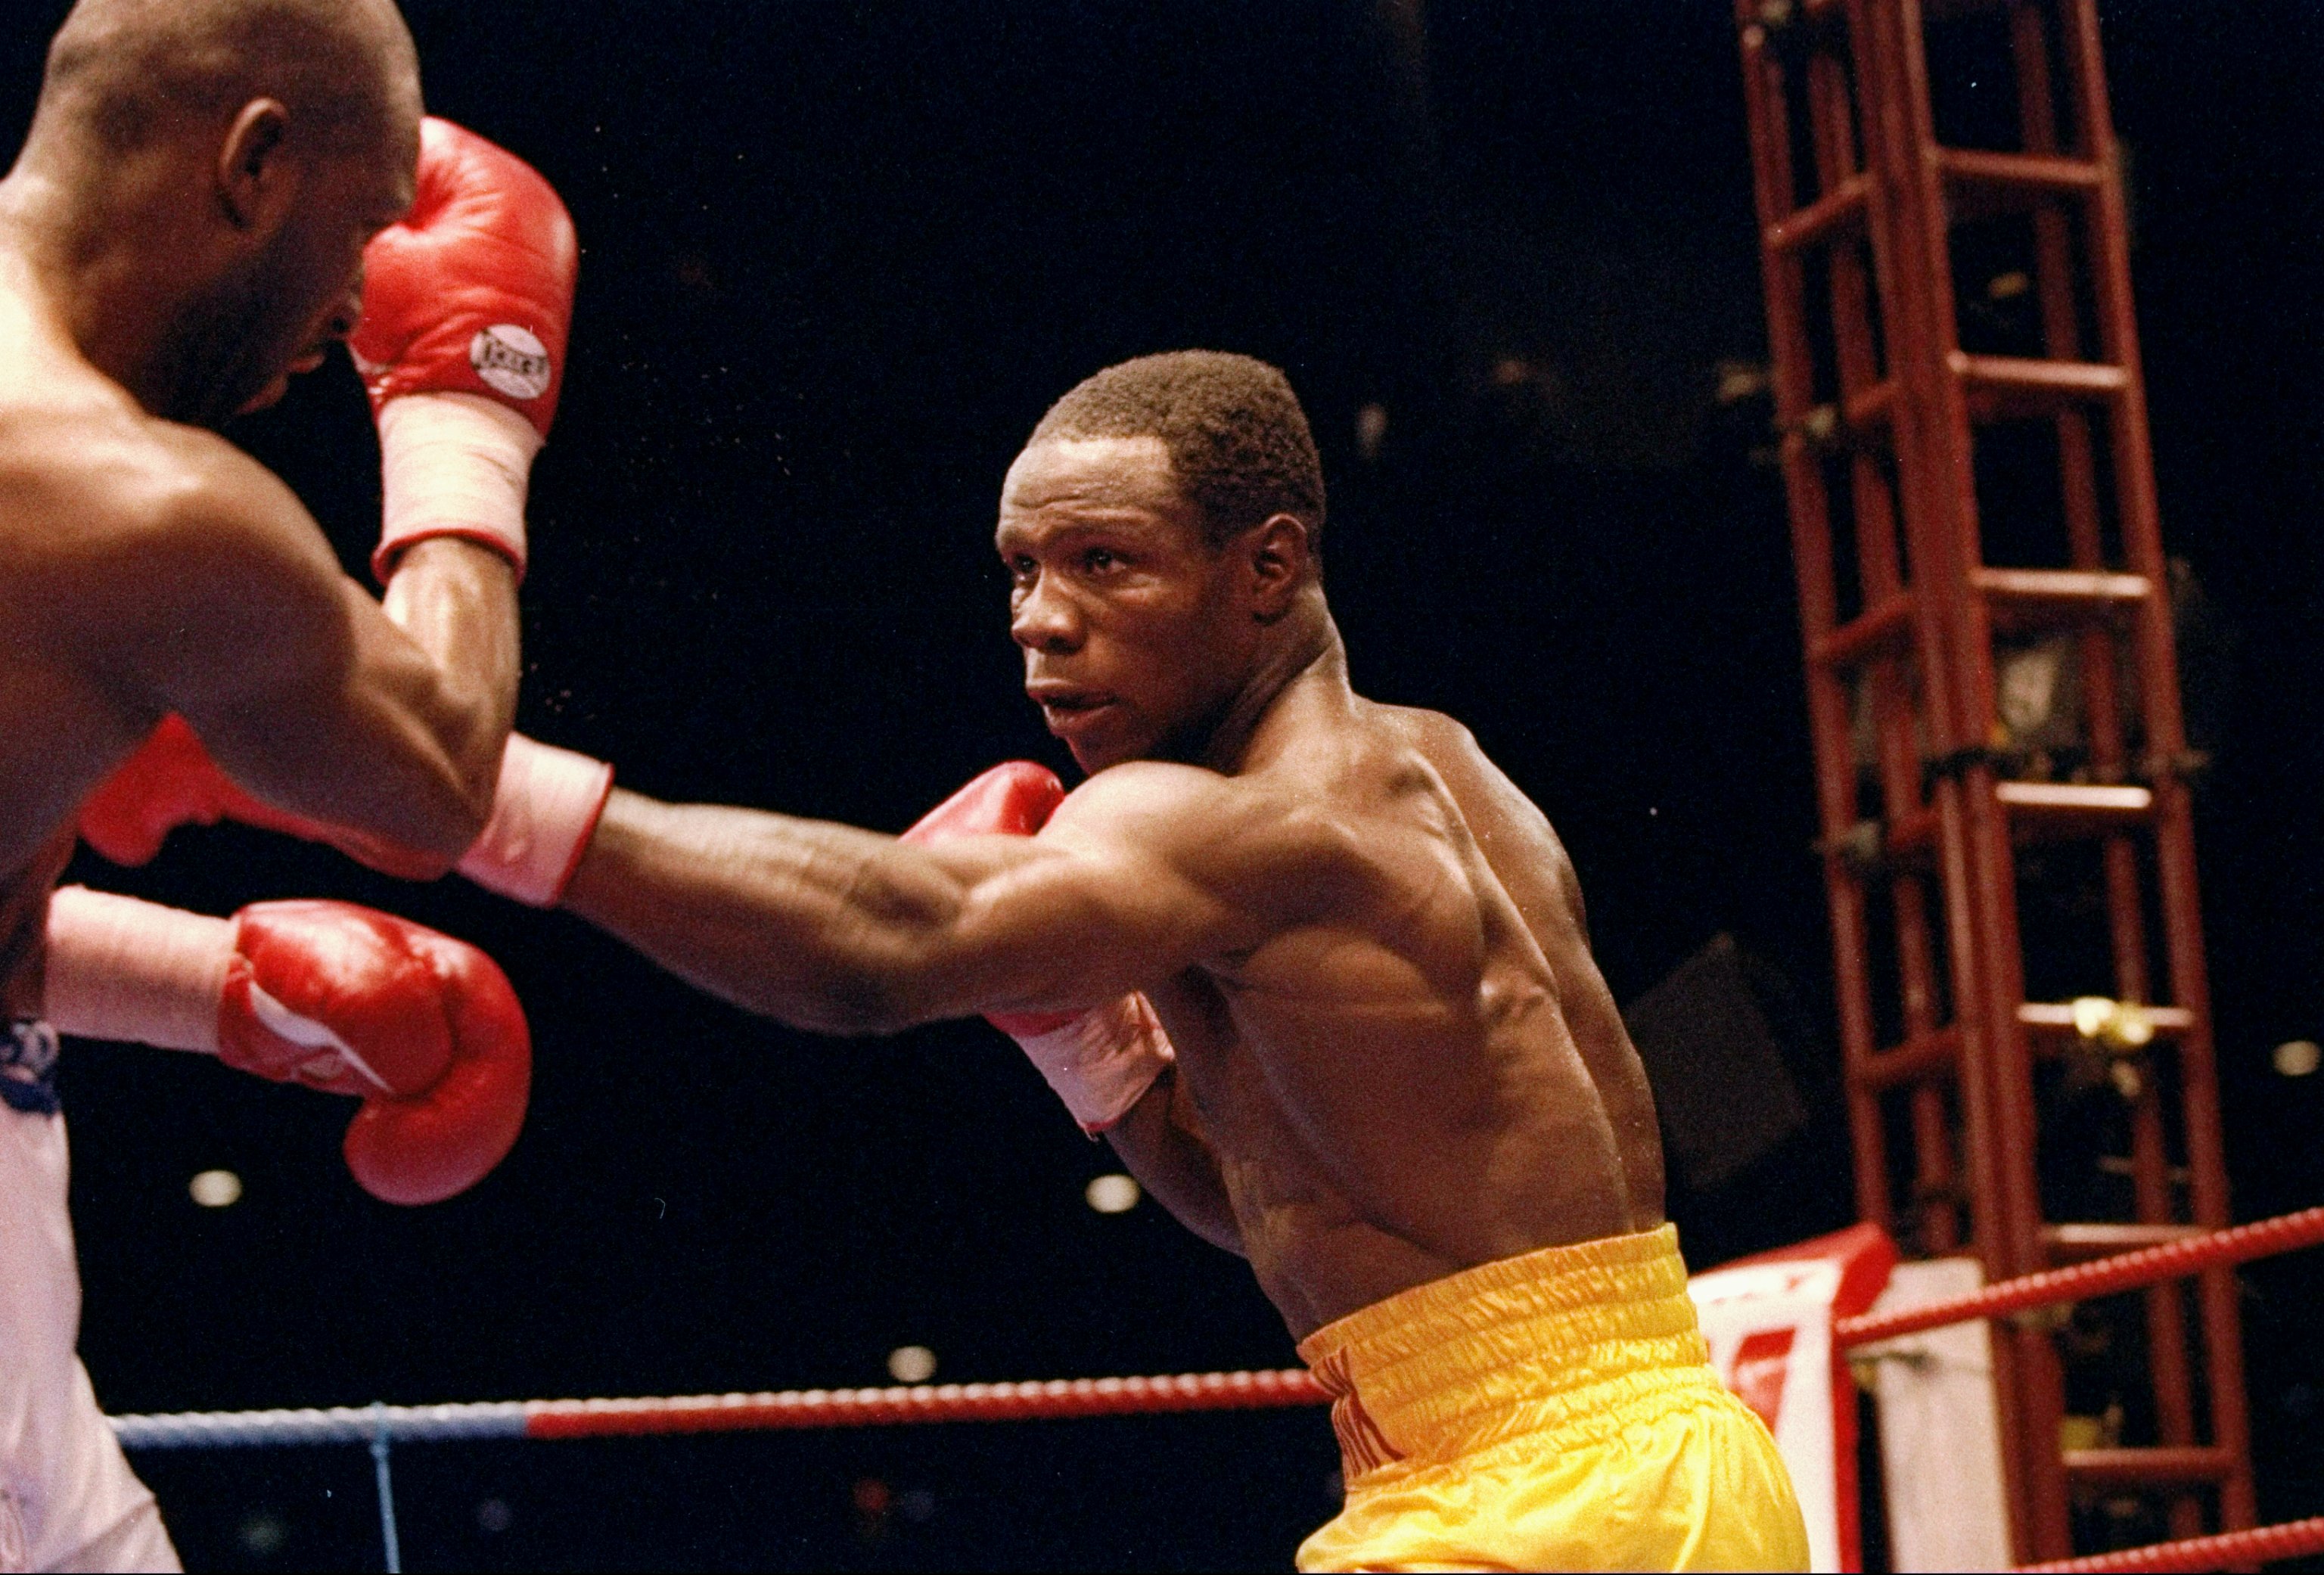 Chris eubank begins by showing a video, which is shown to the audience just...